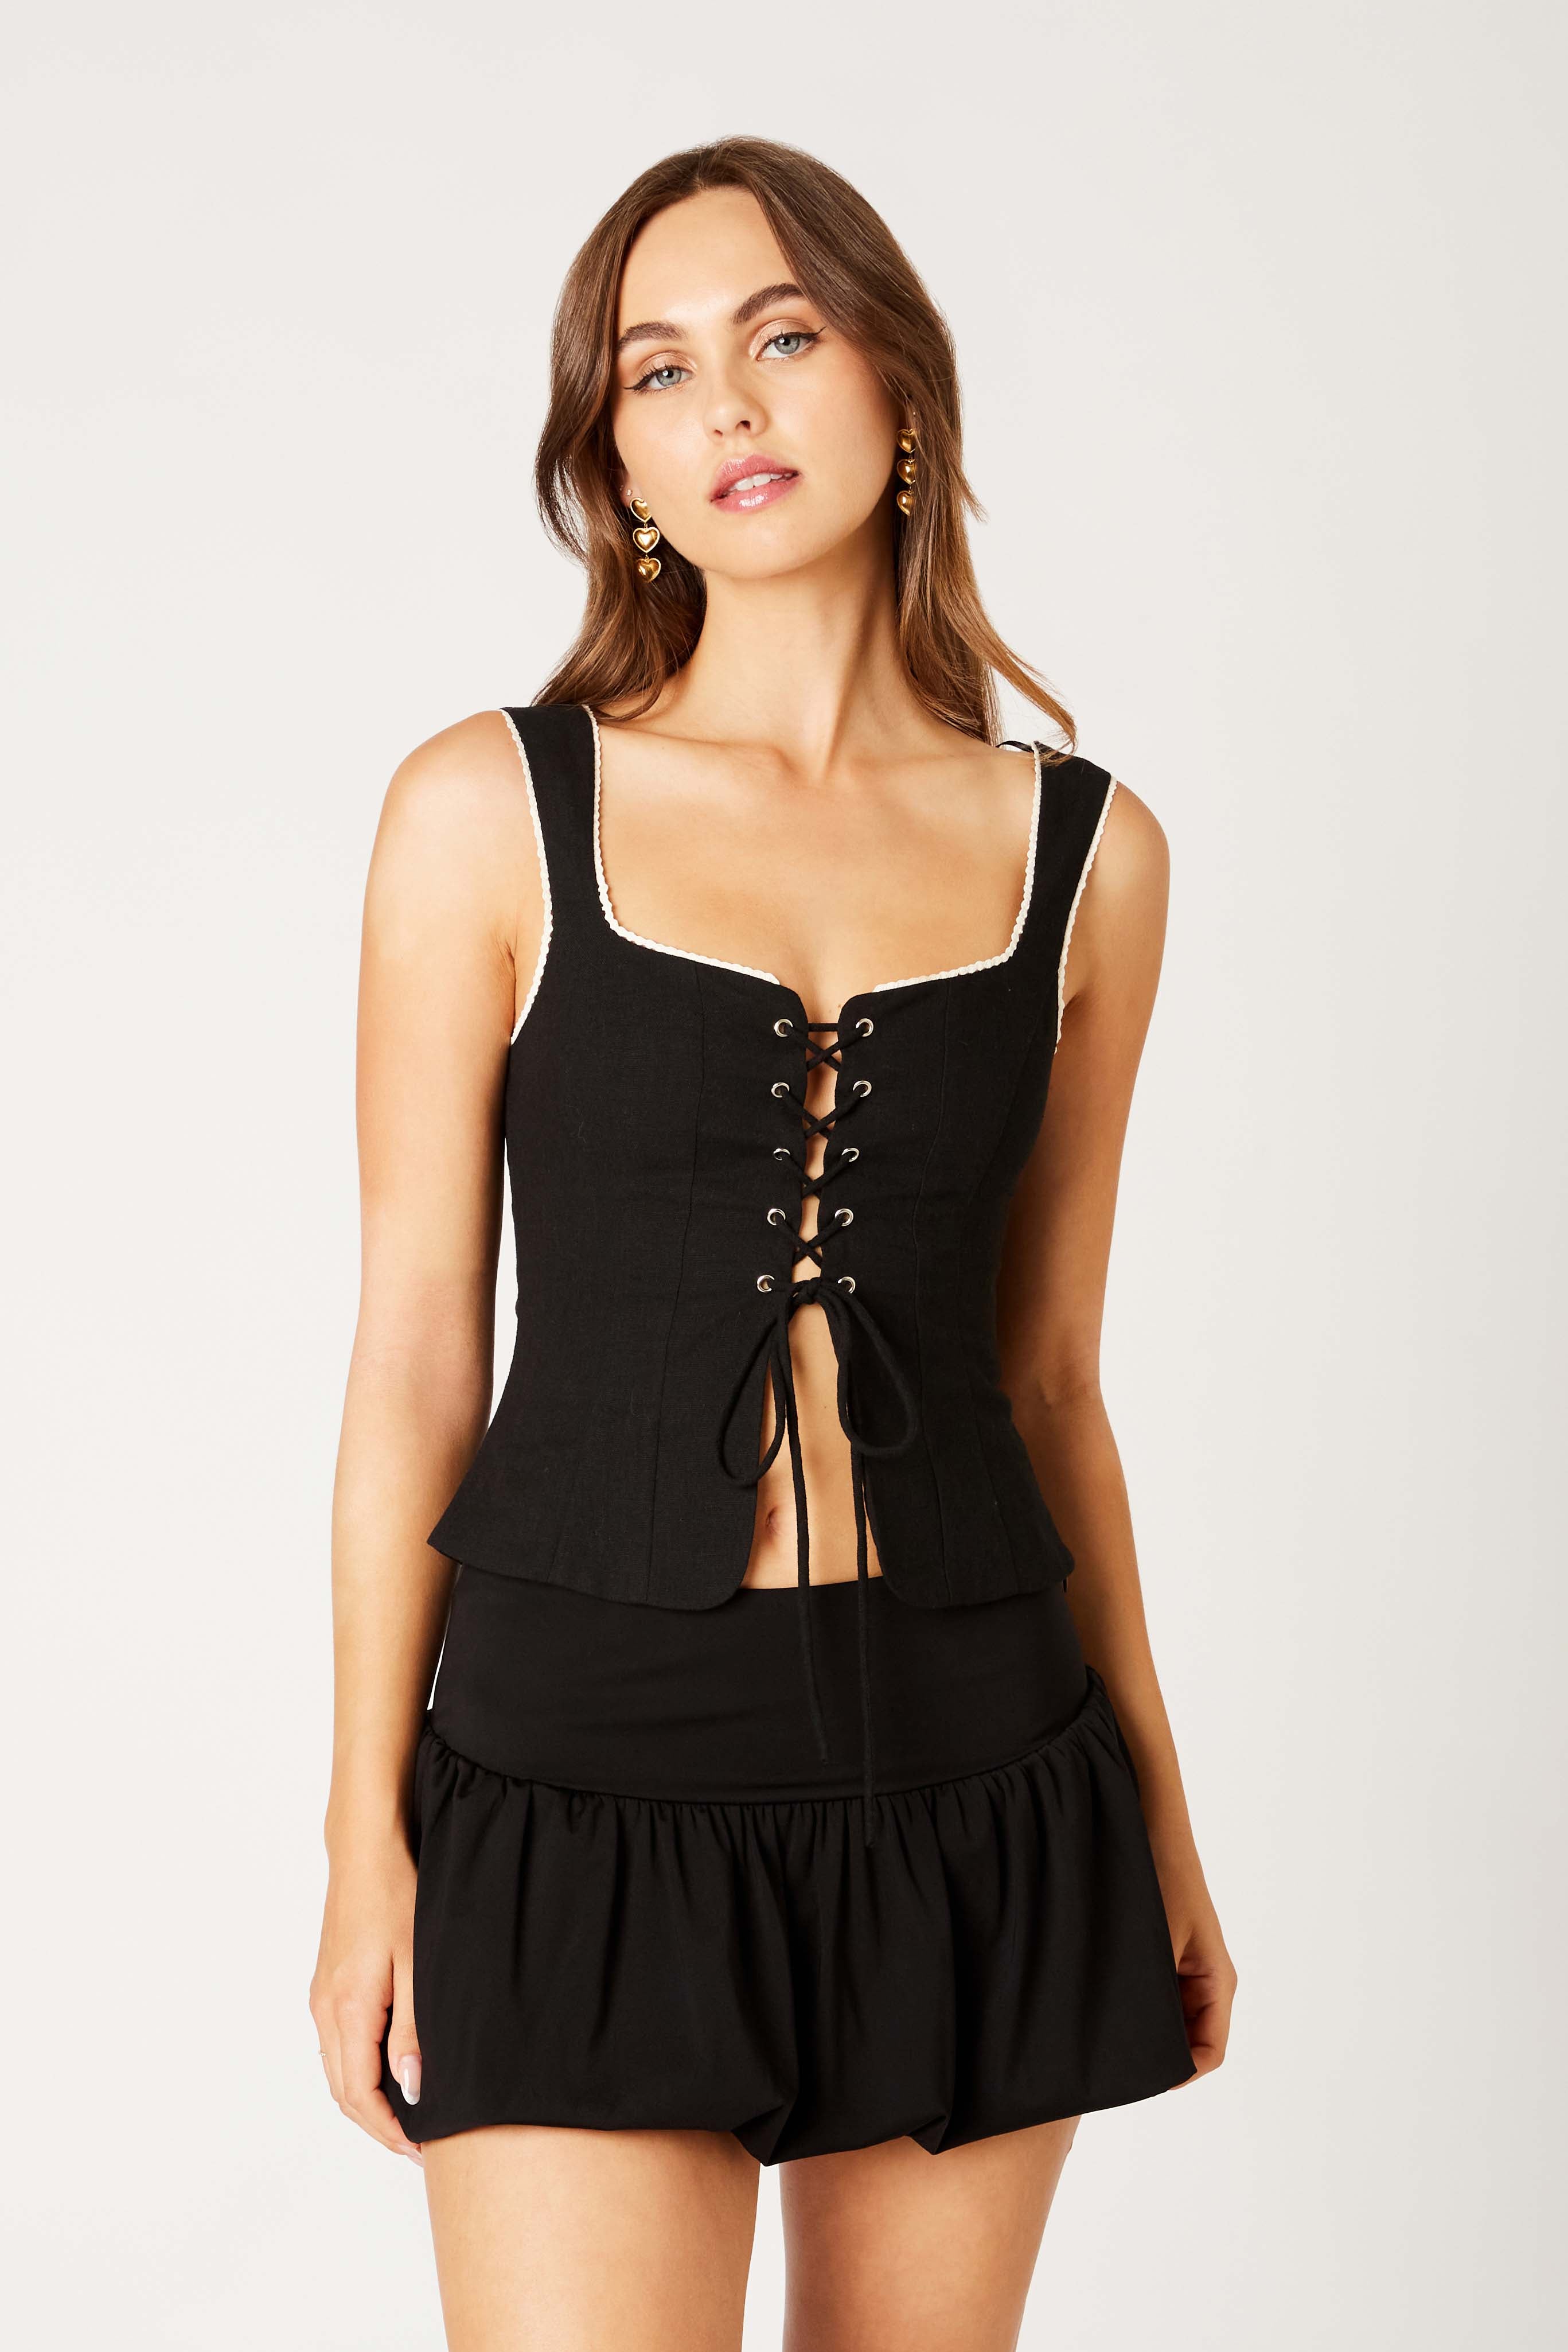 Lace Up Corset Top in black front view